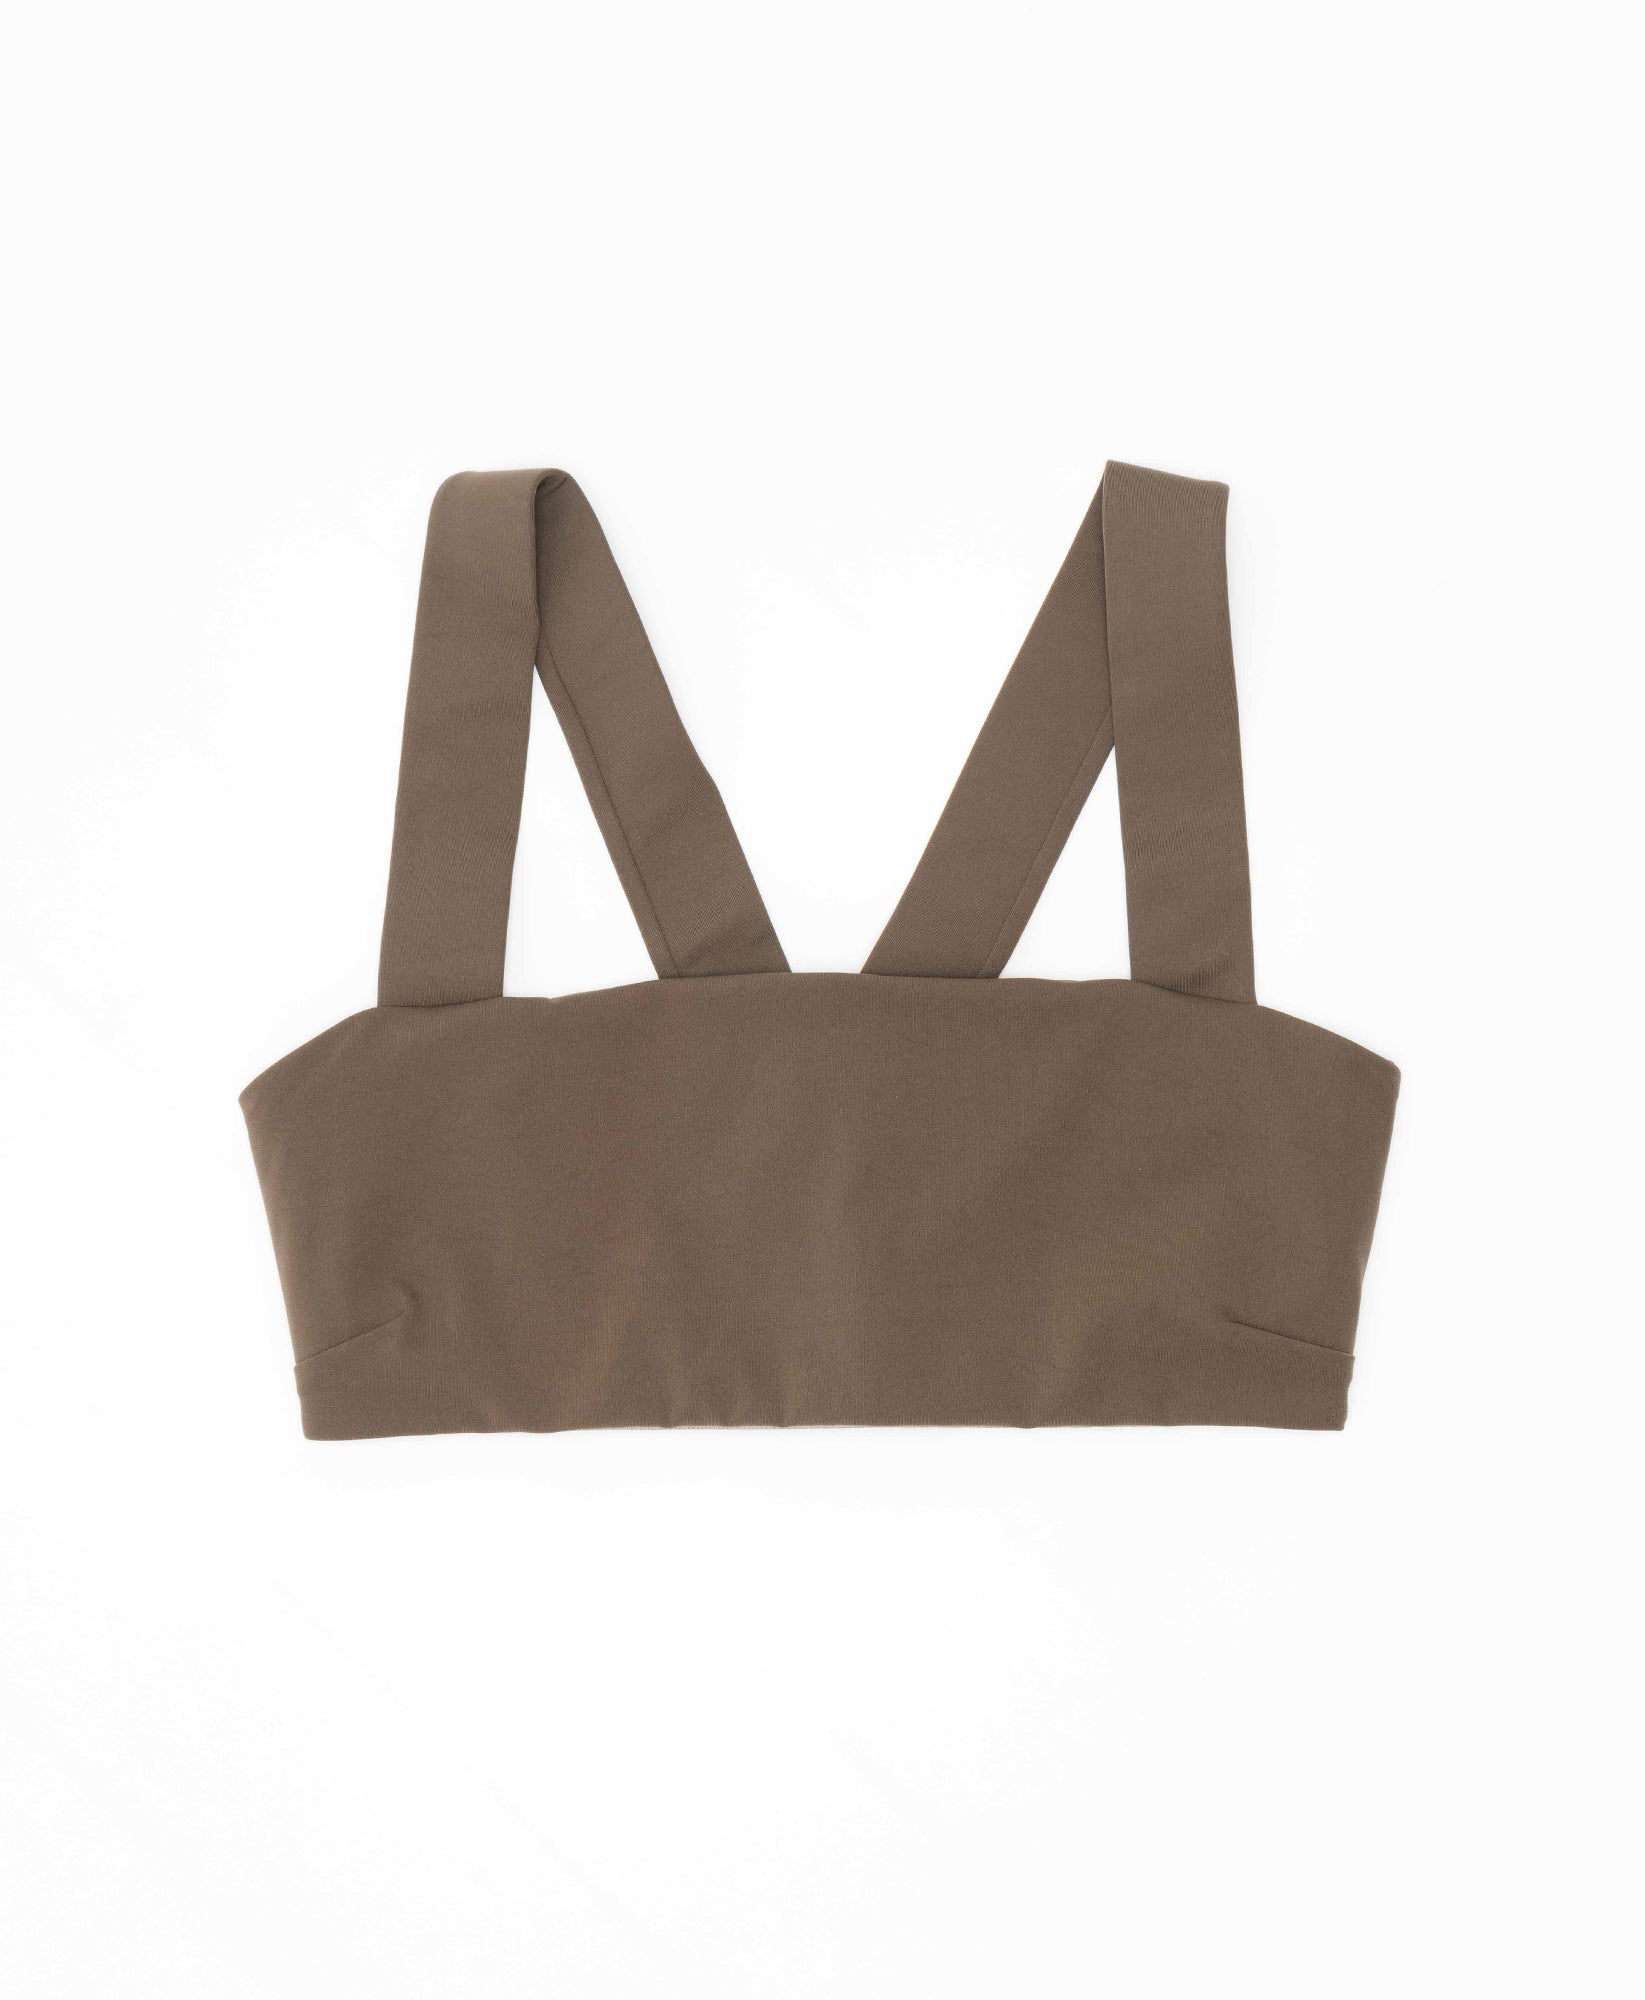 Wear One's At Routine Bra in Canteen Flat Front